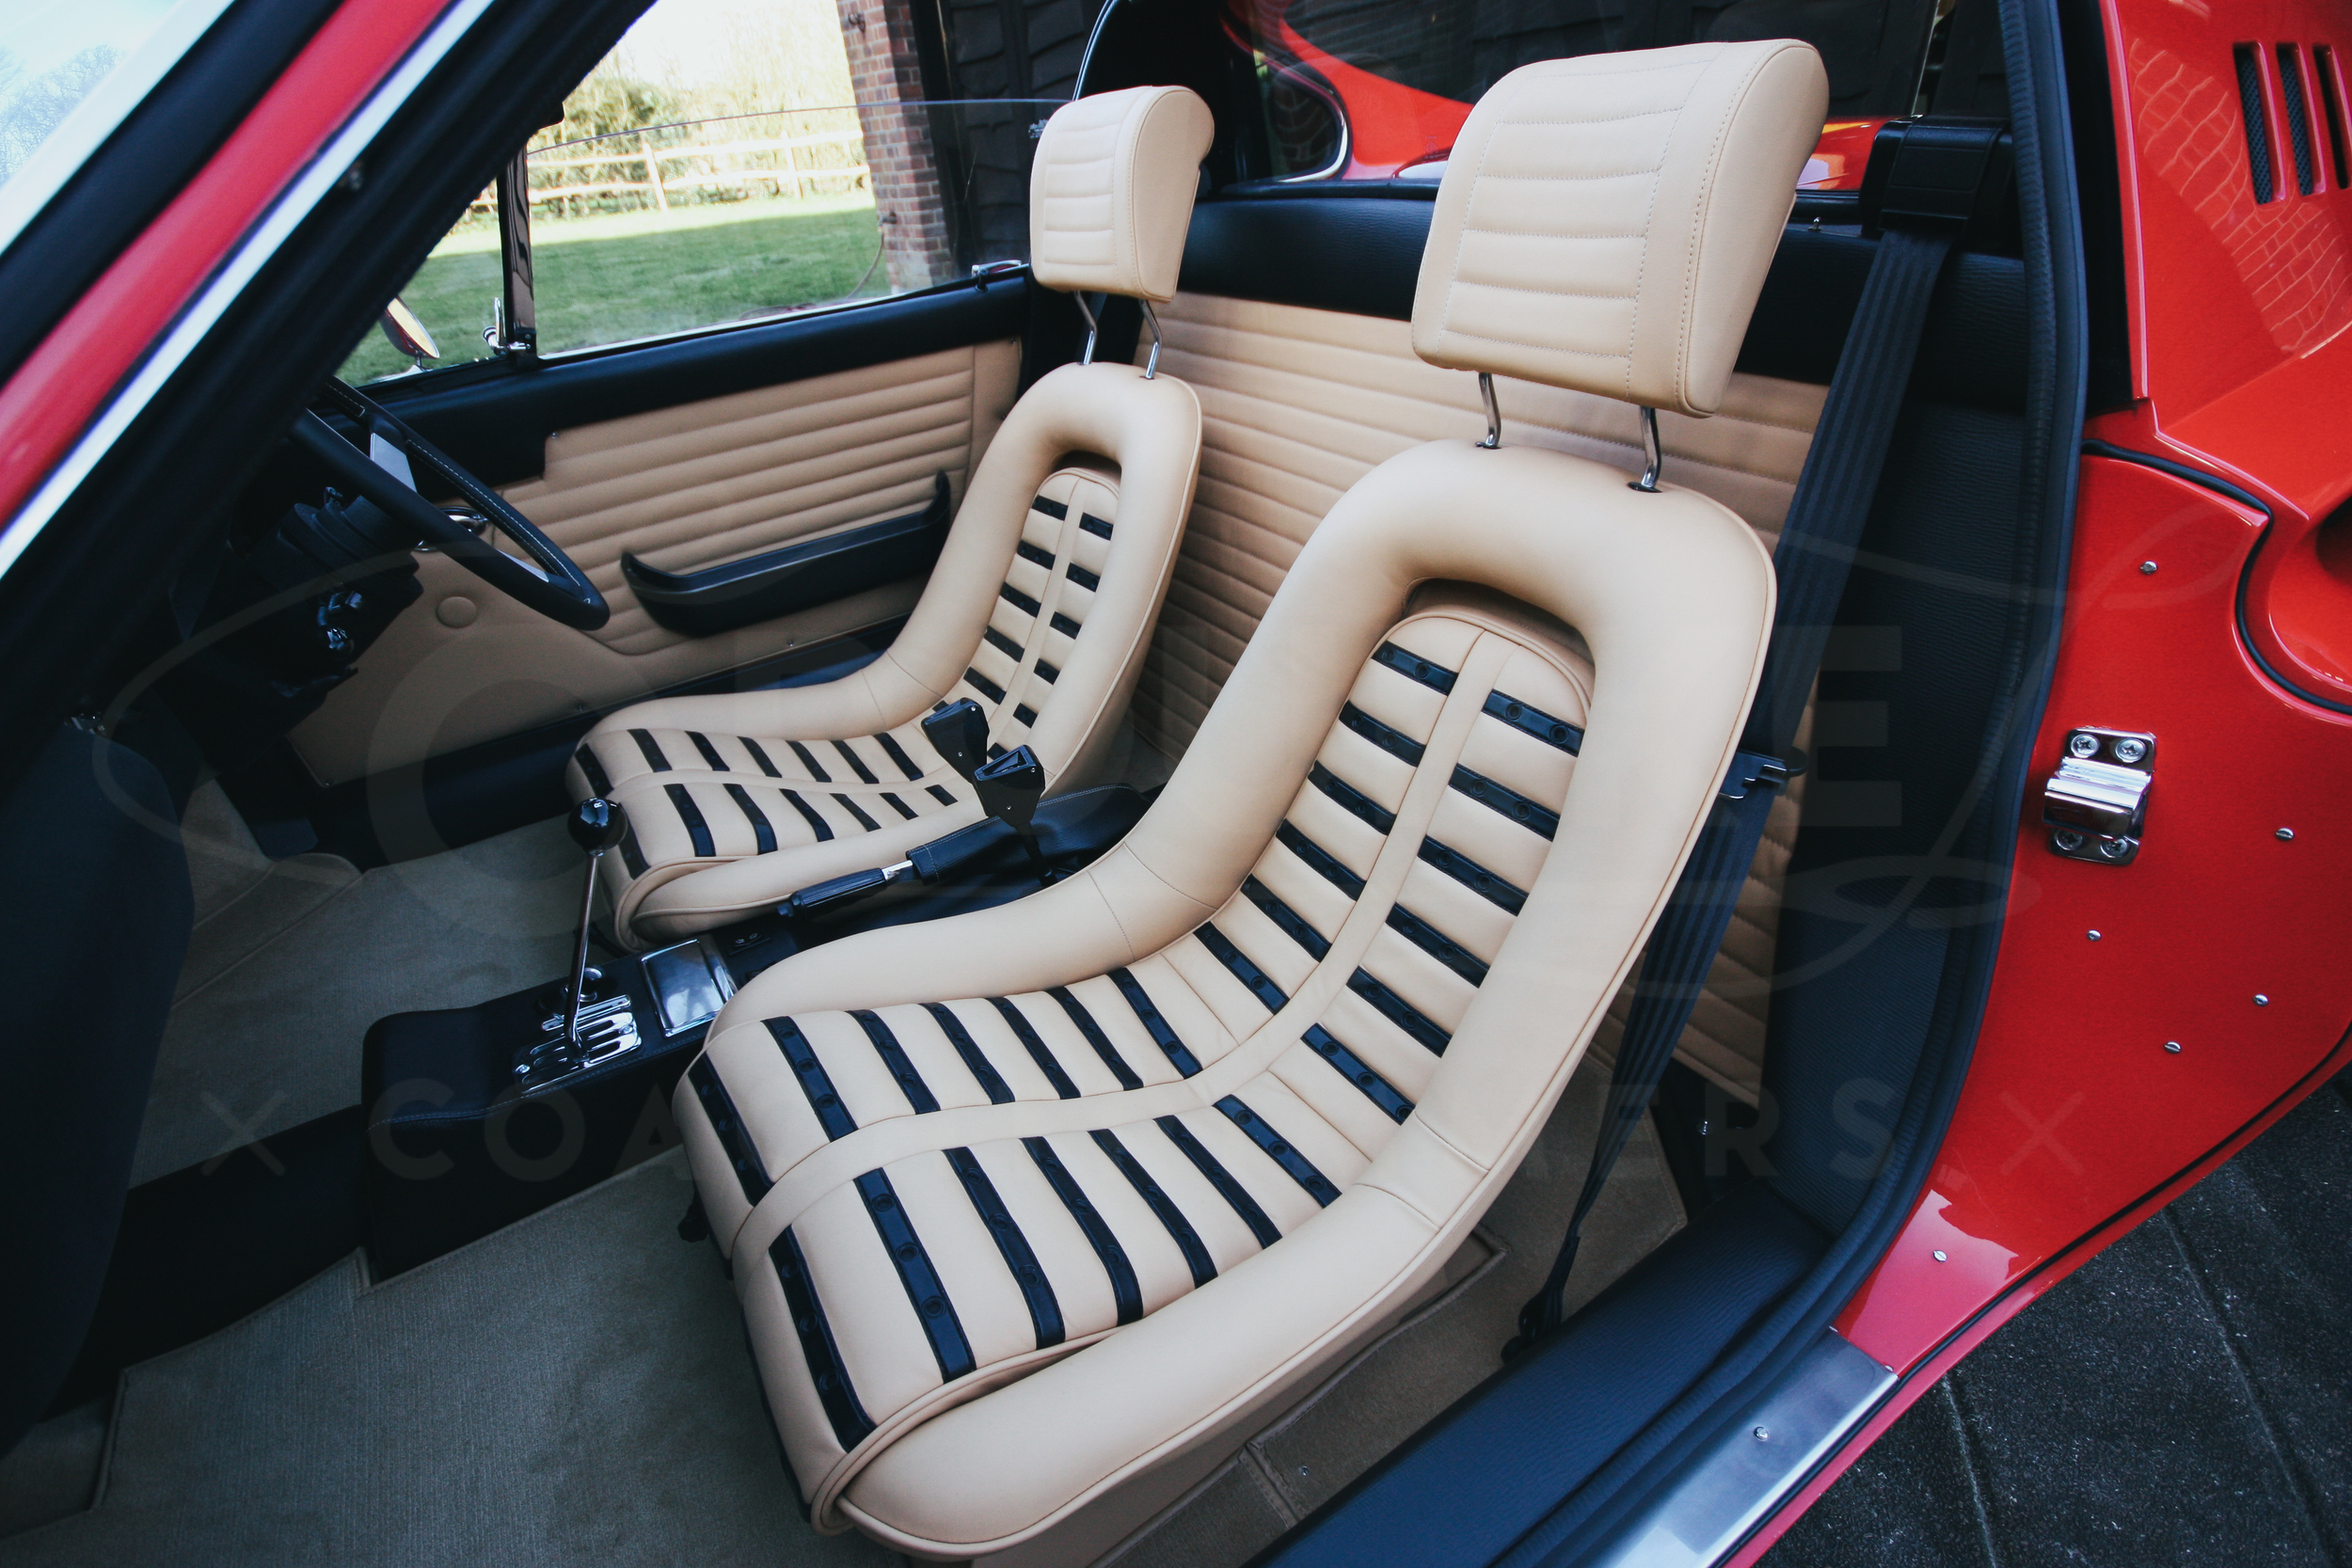 o-rourke-coachtrimmers-ferrari-246-dino-gts-flairs-and-chairs-5.jpg